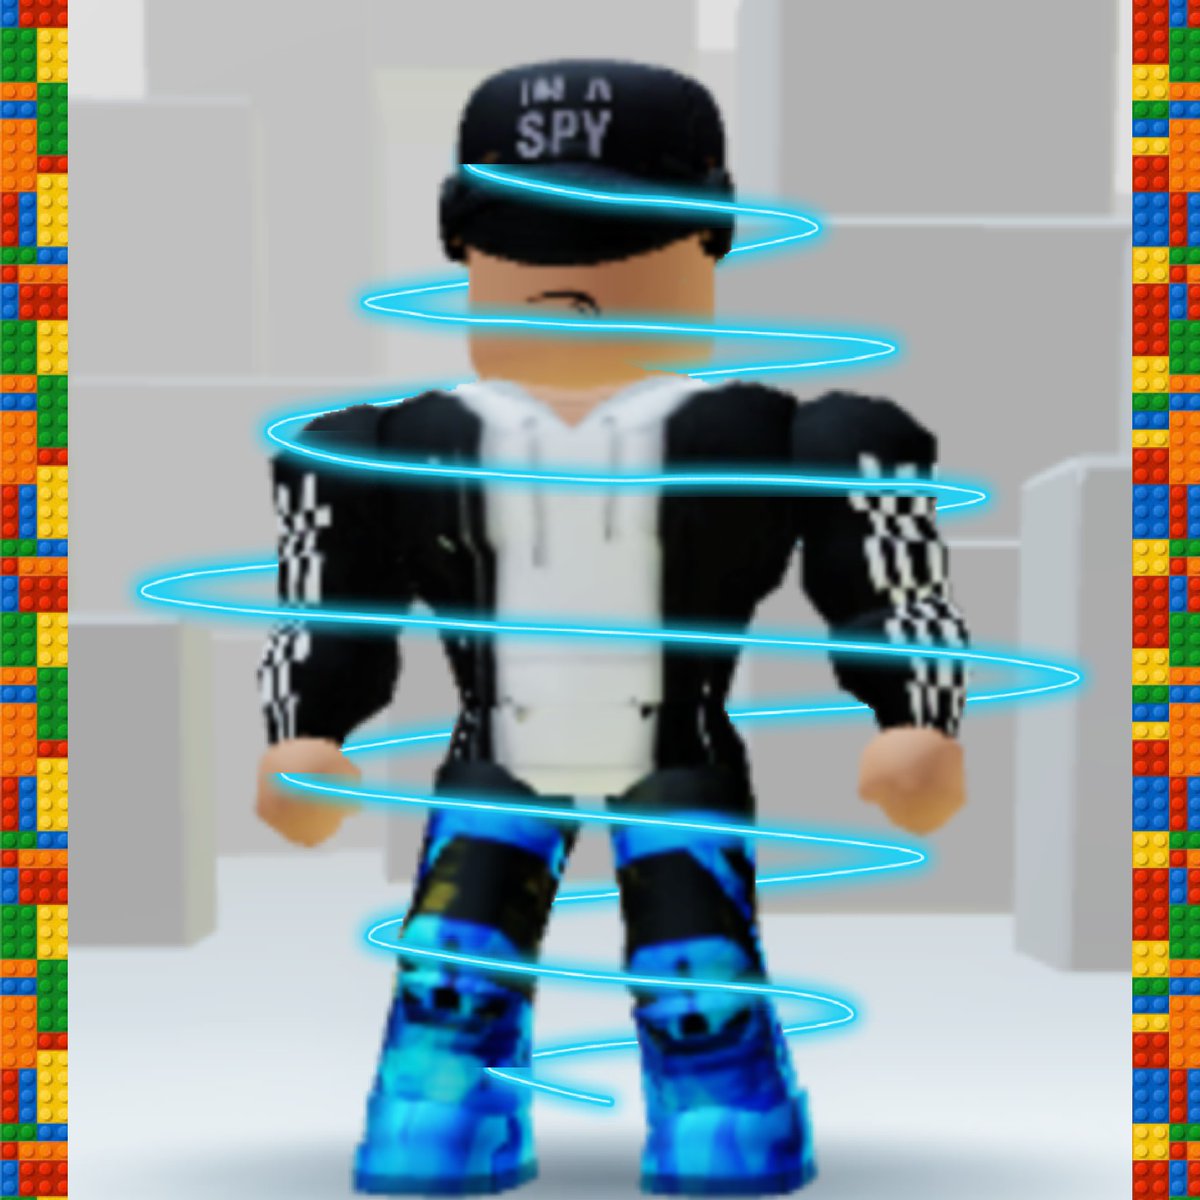 Robloxcharacter Hashtag On Twitter - hashtag robloxcharacter auf twitter